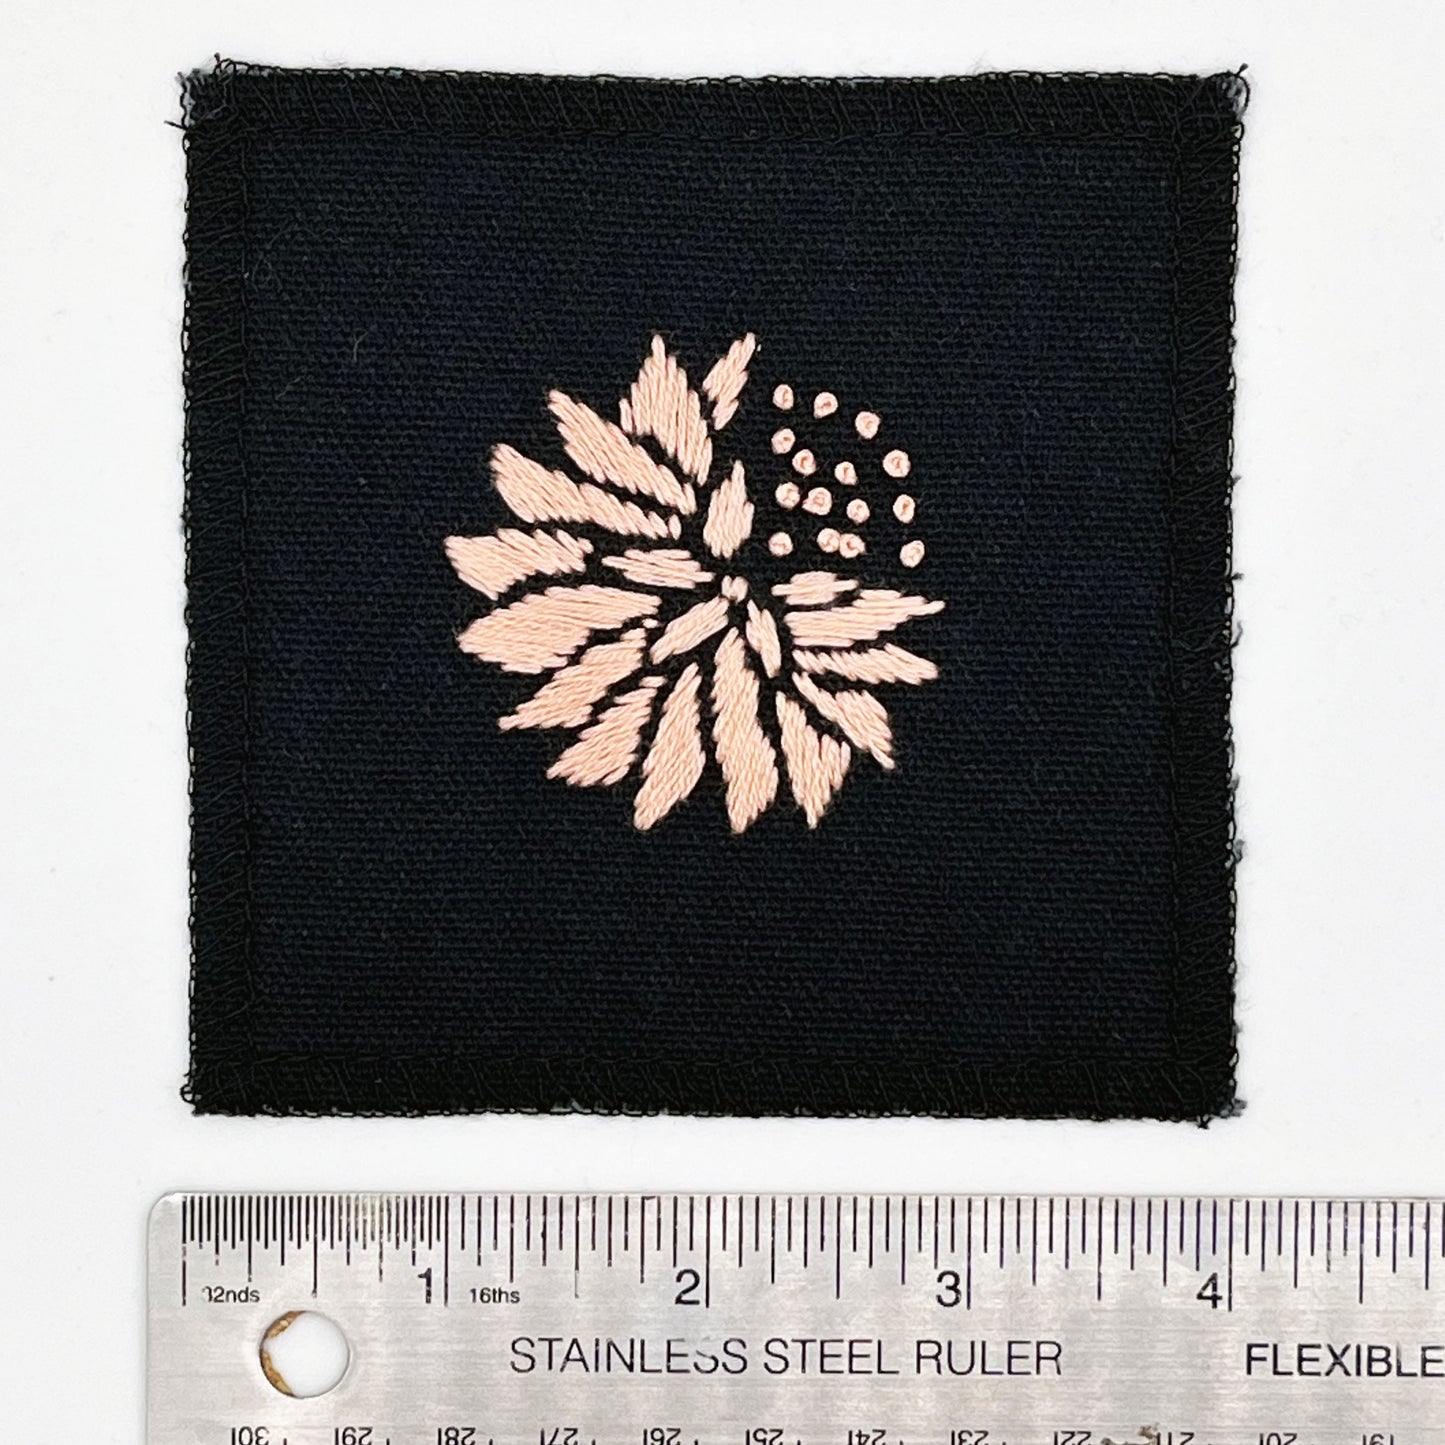 a square patch in black fabric, hand embroidered with a peach colored abstract dandelion made mostly of petals, with a quarter of them replaced with french knots, with overlocked edges, next to a metal ruler to show a width of four inches